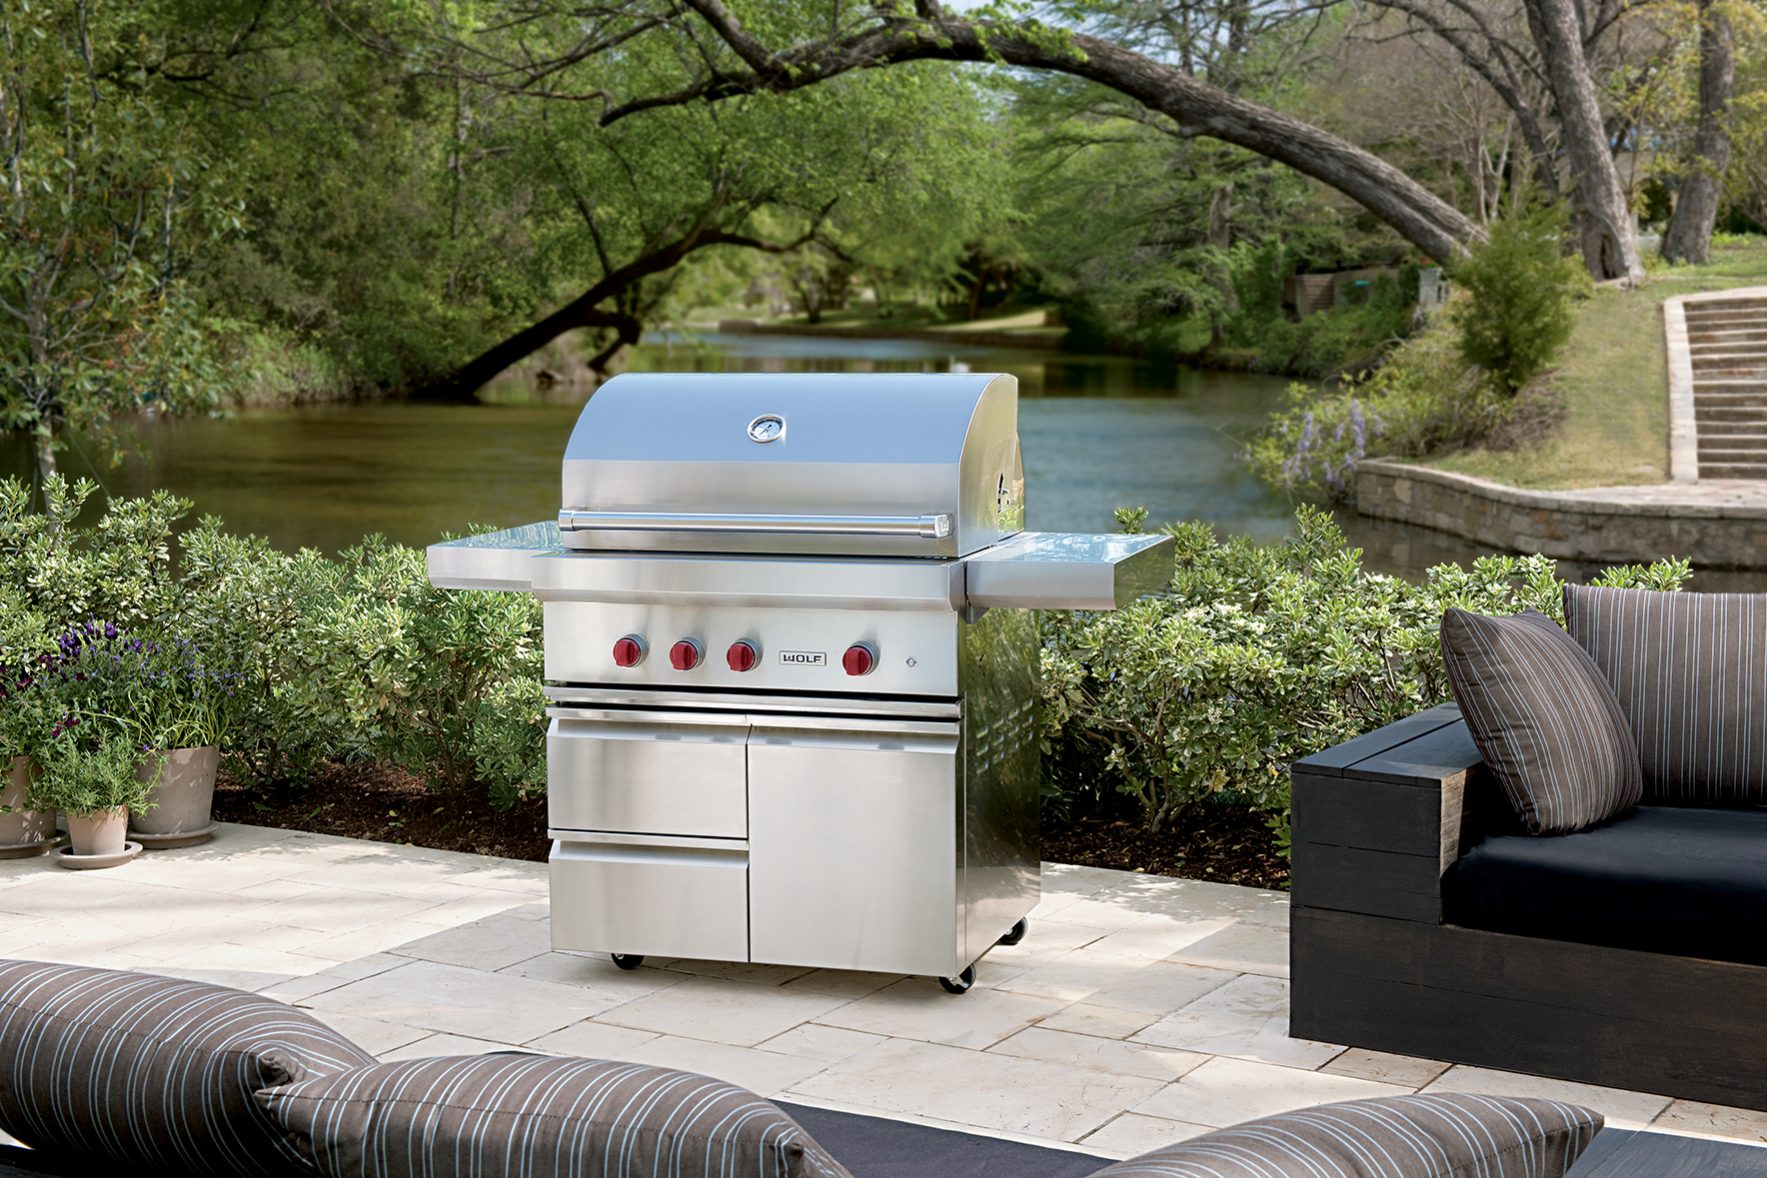 Outdoor grill and equipment made by WOLF, the trusted brand for high-quality cooking equipment.